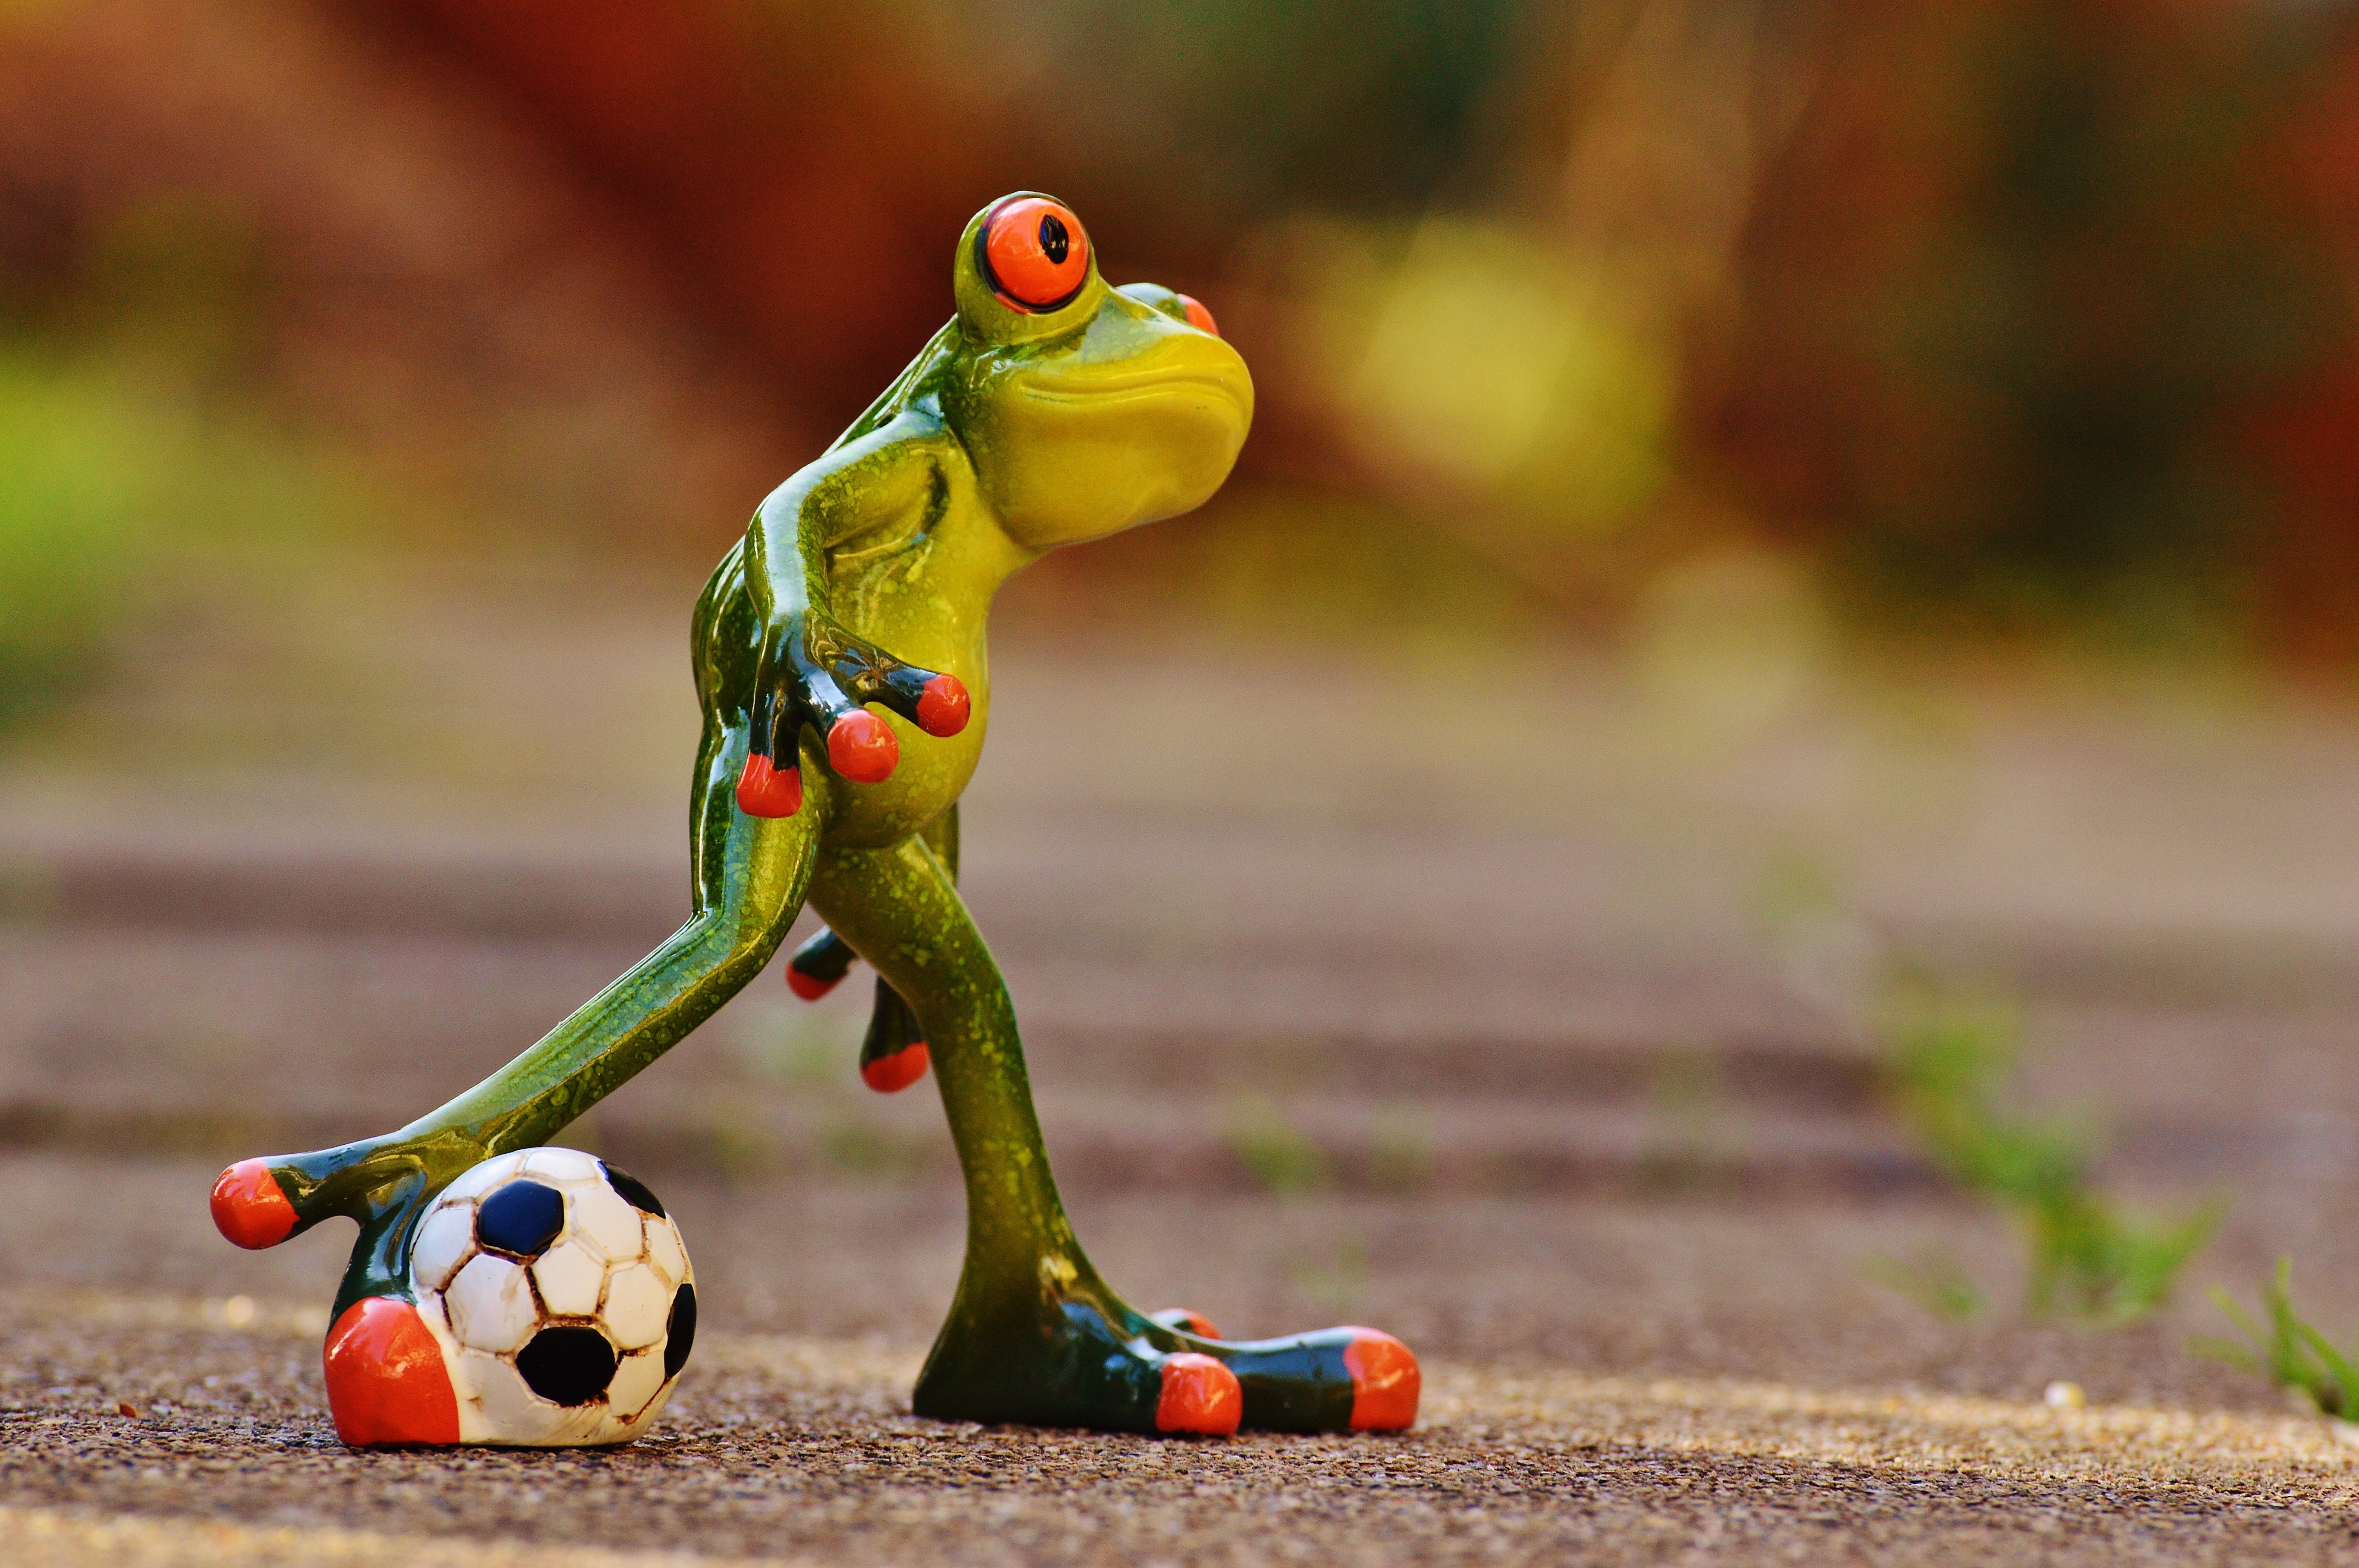 Funny, Cute, Frog, Sweet, Play, Football, soccer, no people